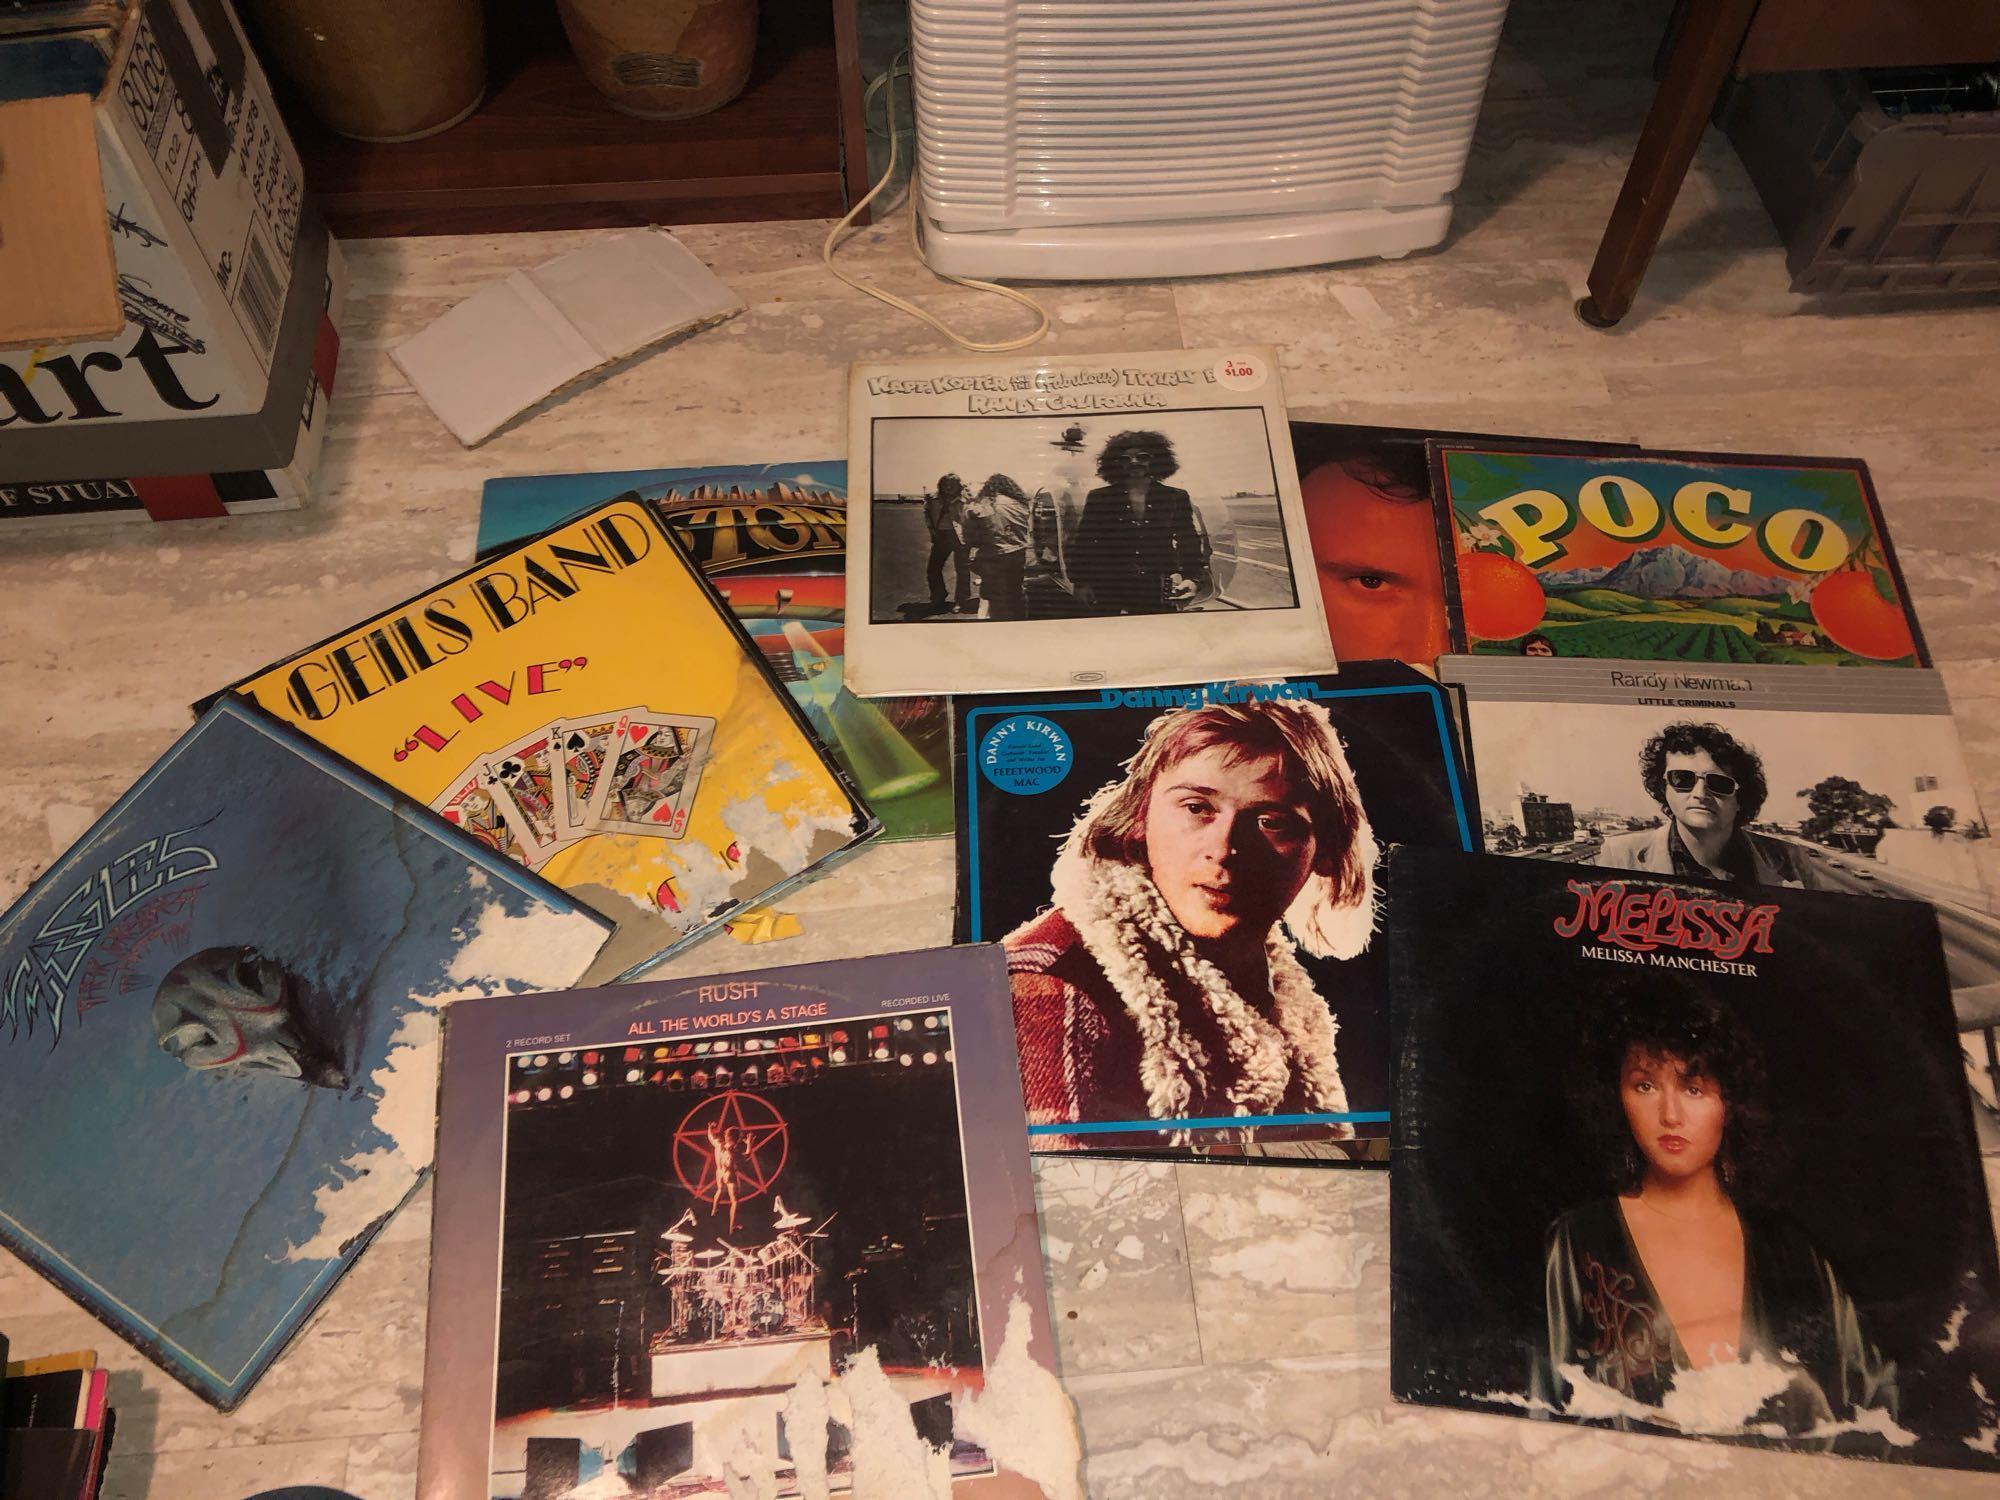 100 plus 78 rock and country records incl. KISS, Rolling Stones, Lynard Skinner, Grateful Dead